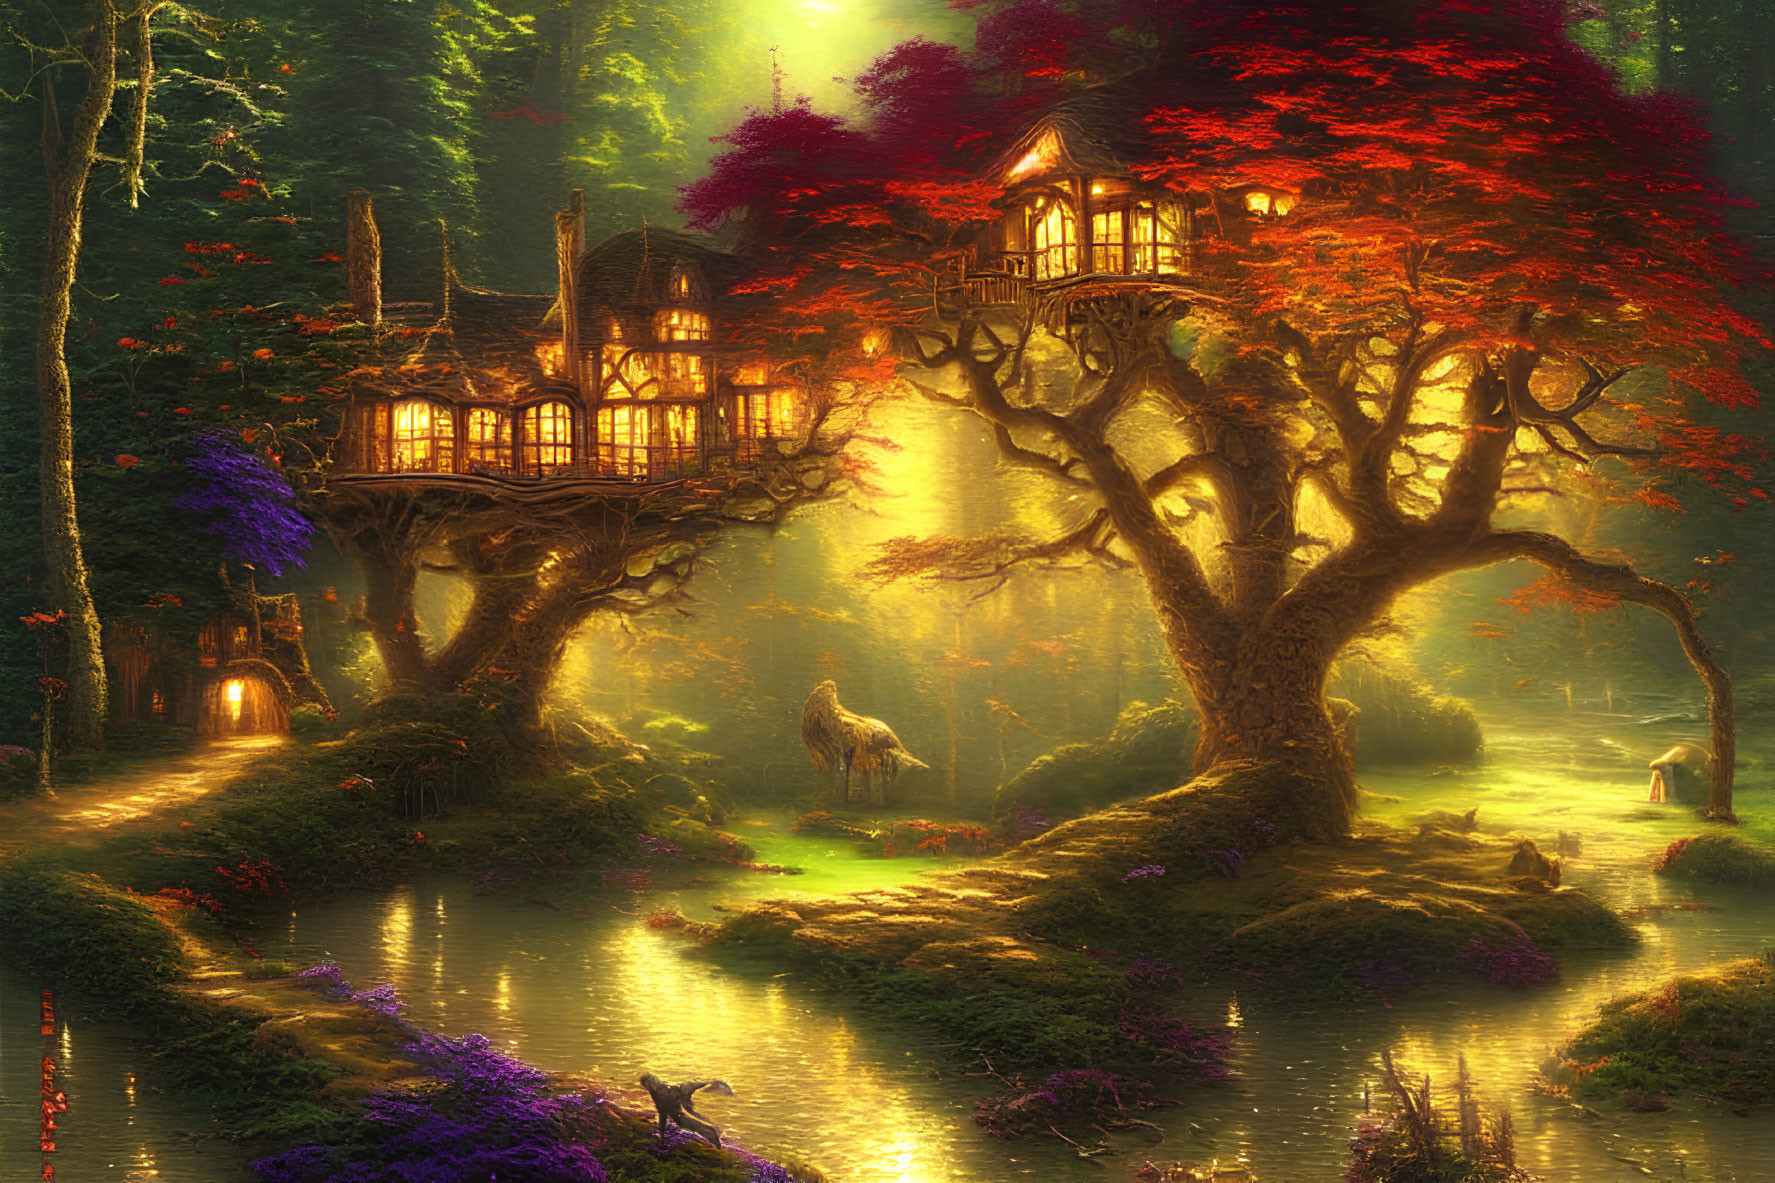 Enchanted forest fantasy illustration with cozy treehouse and unicorn